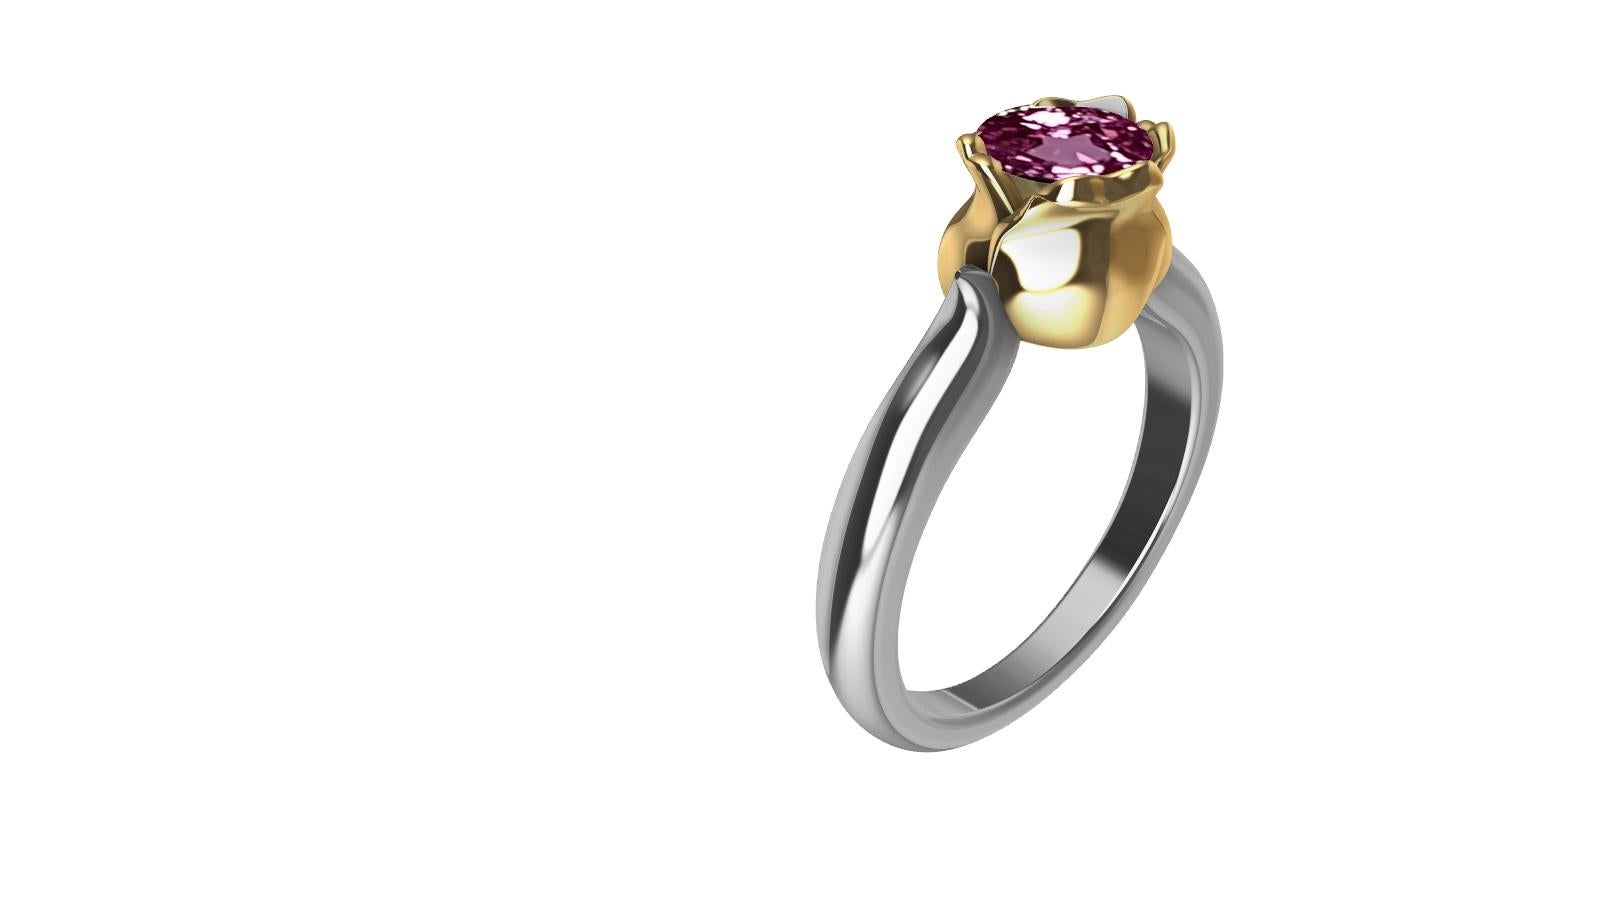 For Sale:  18 Karat Yellow Gold and Platinum Ceritfied Pink Sapphire 1.18 Carat Tulip Ring 7